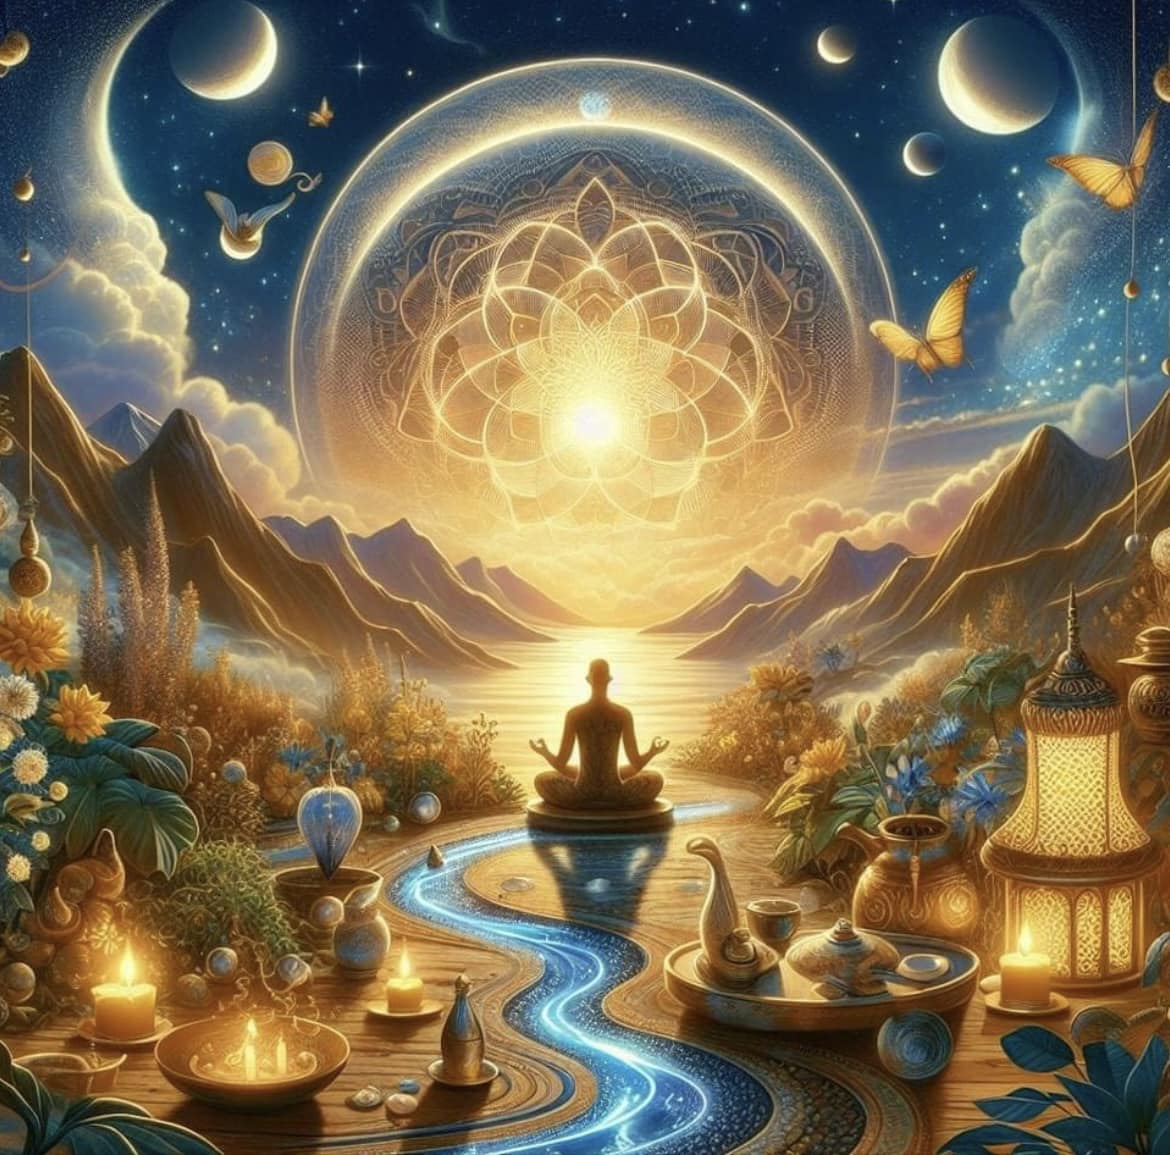 You are currently viewing Frequency Holders for the Rose Matrix ~ Awaken, Integrate, EXPAND ~ Unconditional Love from Gaia Core ~ Igniting the Blue Flame Within Us